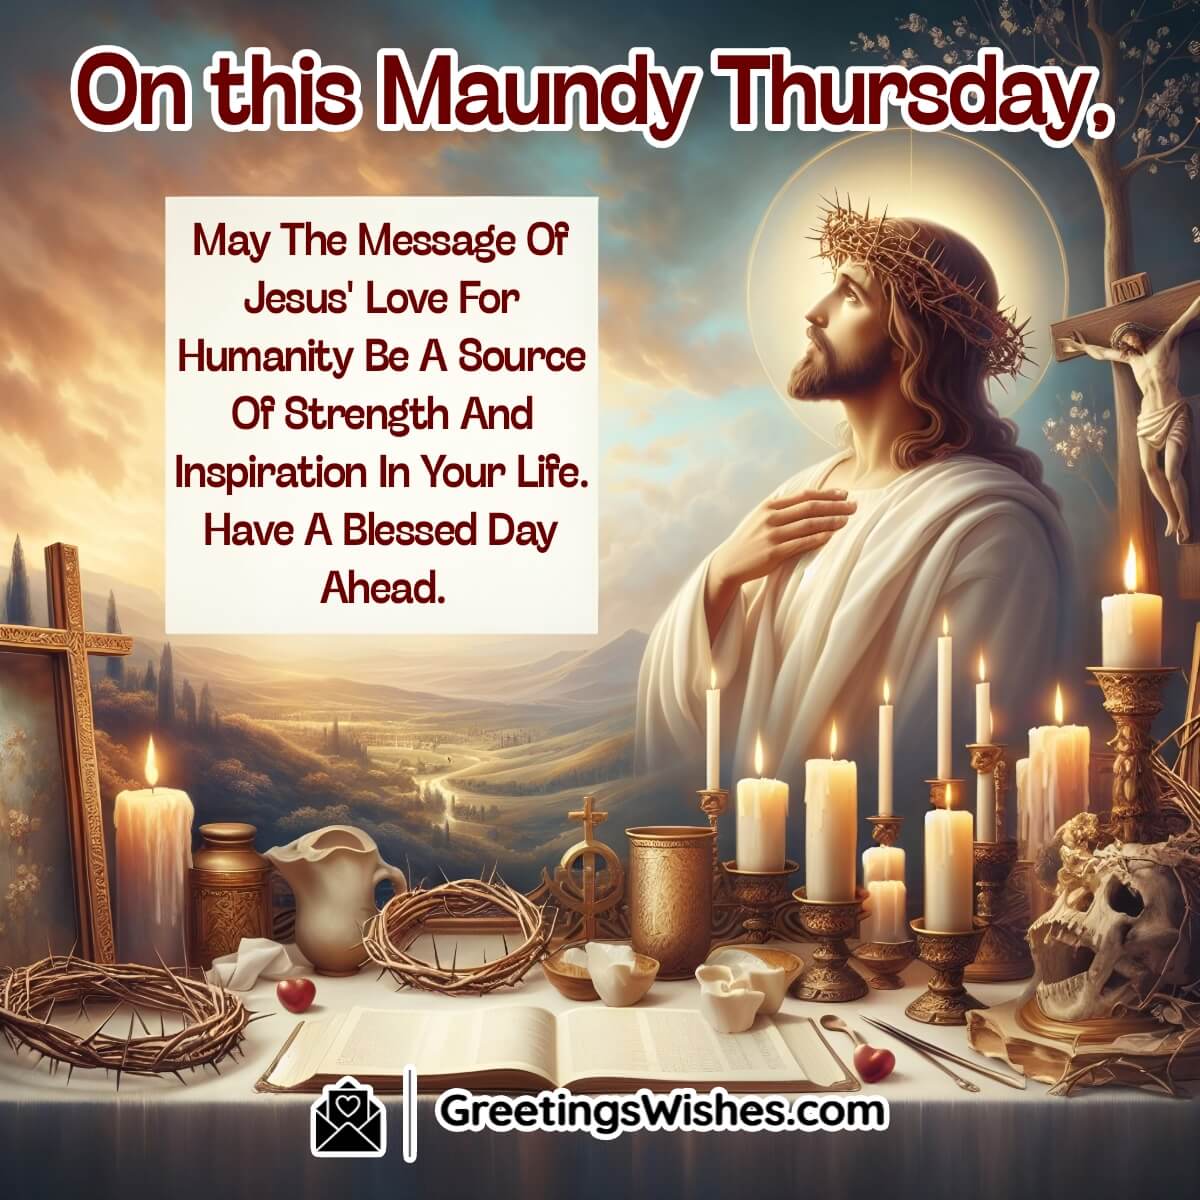 Blessed Maundy Thursday Message